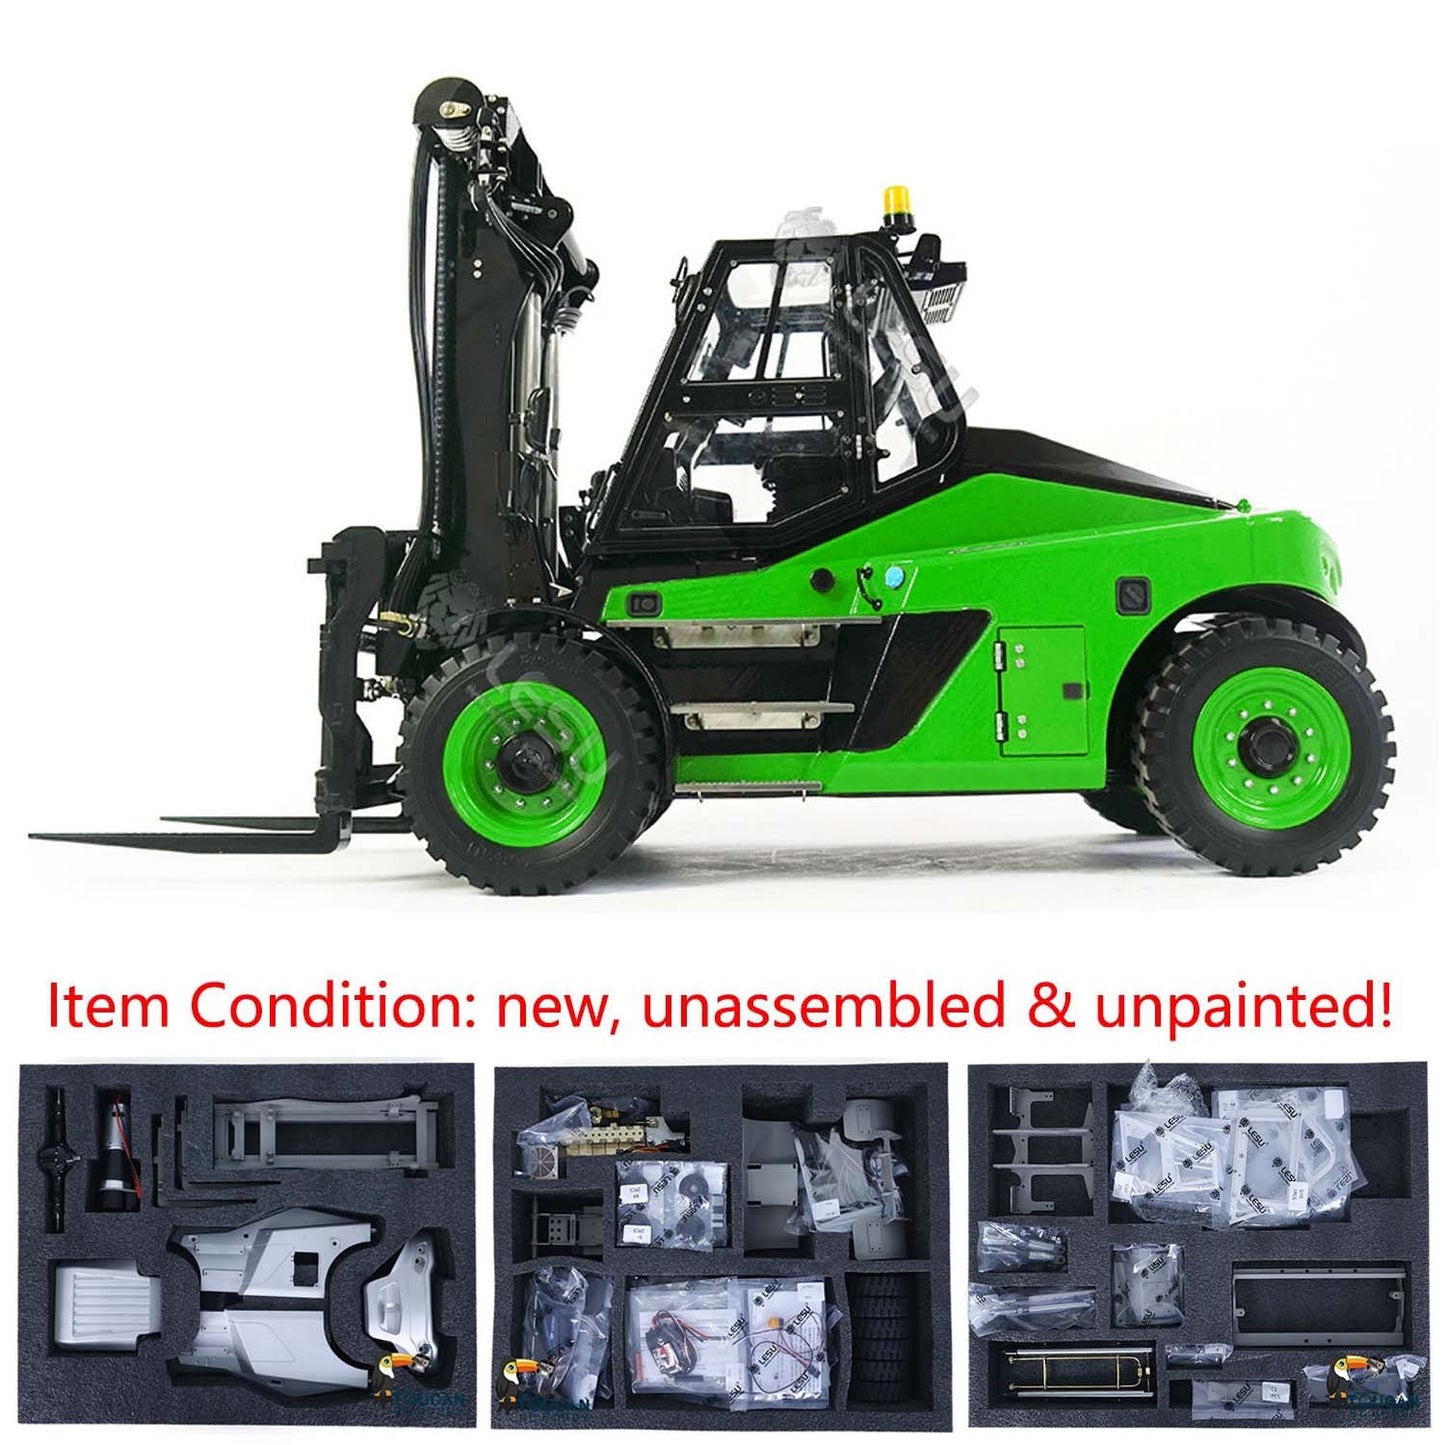 IN STOCK LESU 1/14 Metal RC Hydraulic forklift Remote Control Painted Model Aoue-LD160S ESC Motor Servo 6CH Reversing Valve